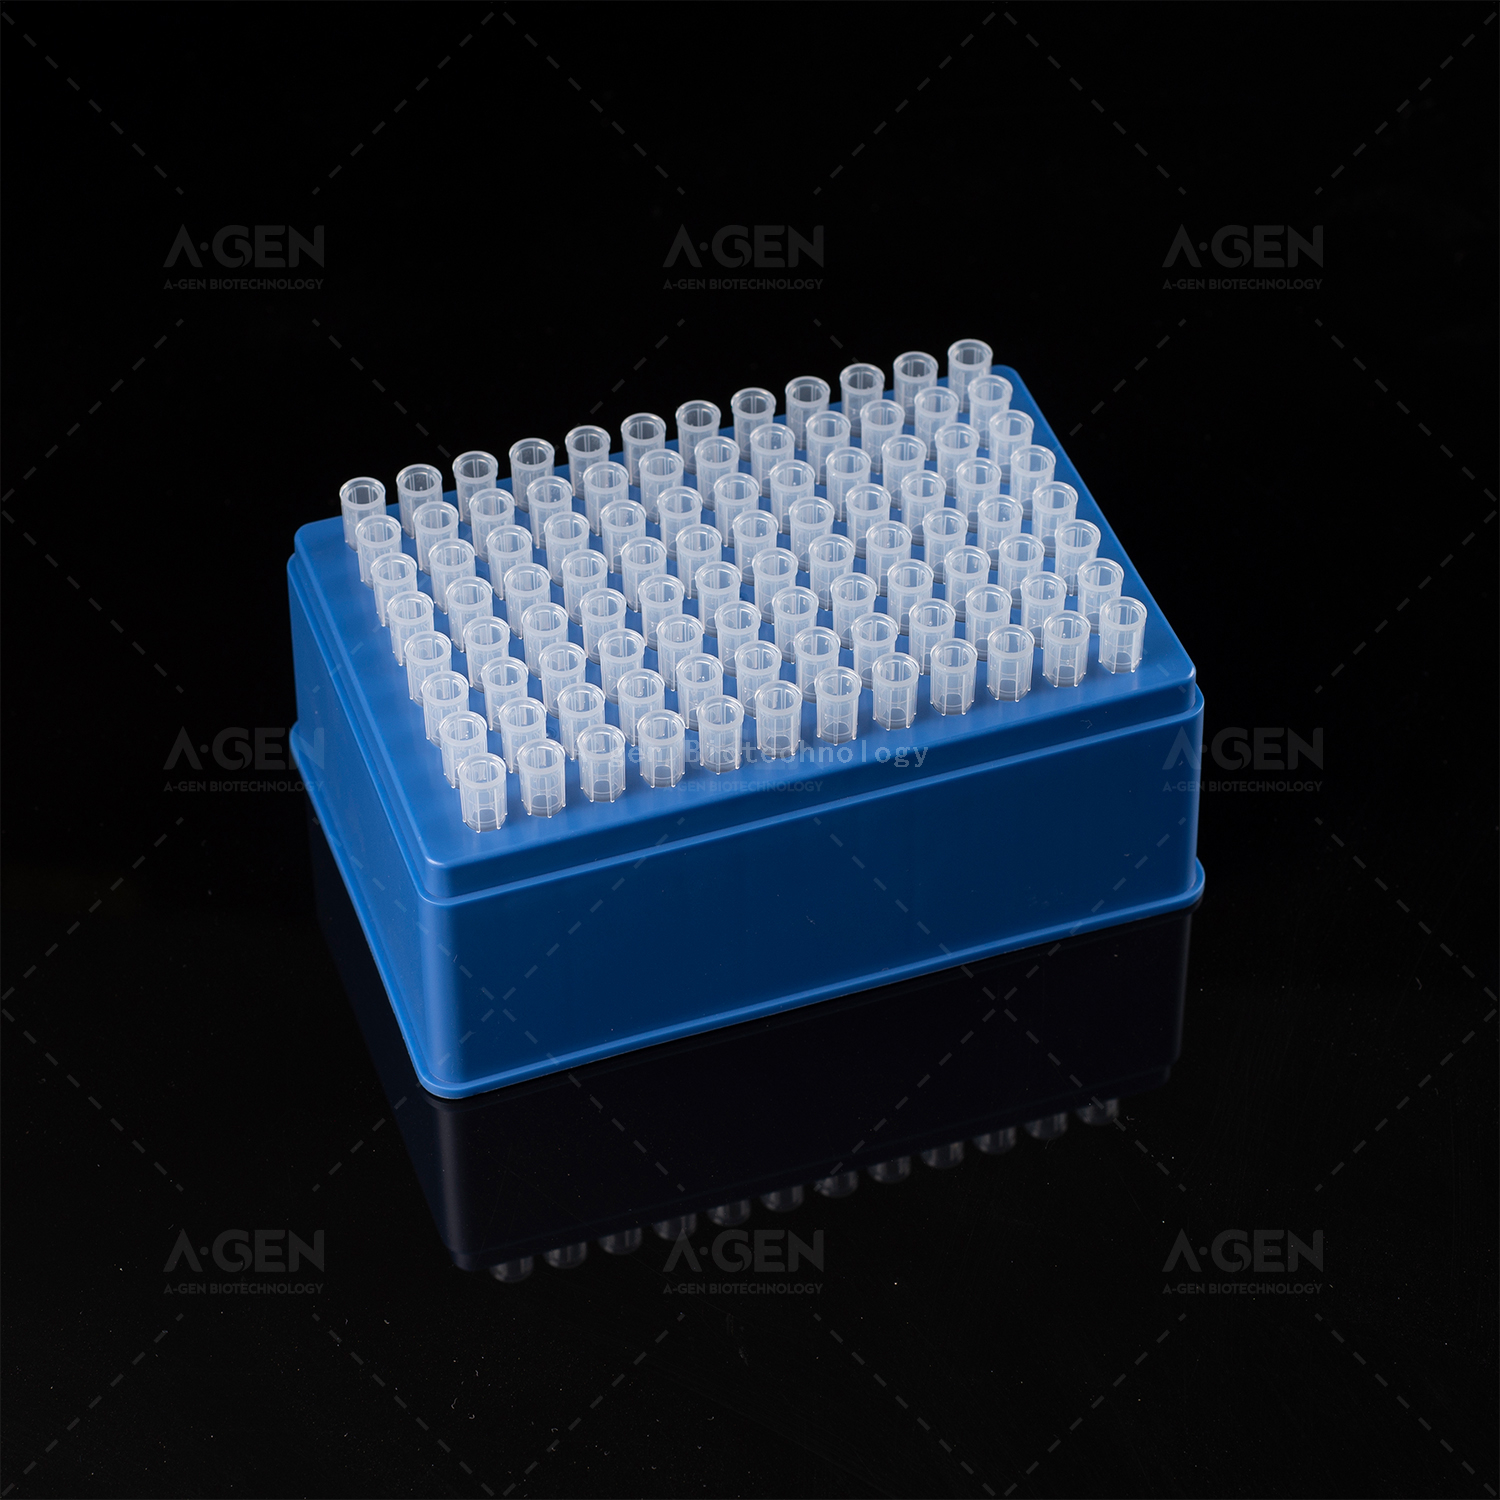 BECKMAN 250μL Clear Robotic PP Pipette Tip (Racked,sterilized) for Liquid Transfer No Filter FX-250-RS